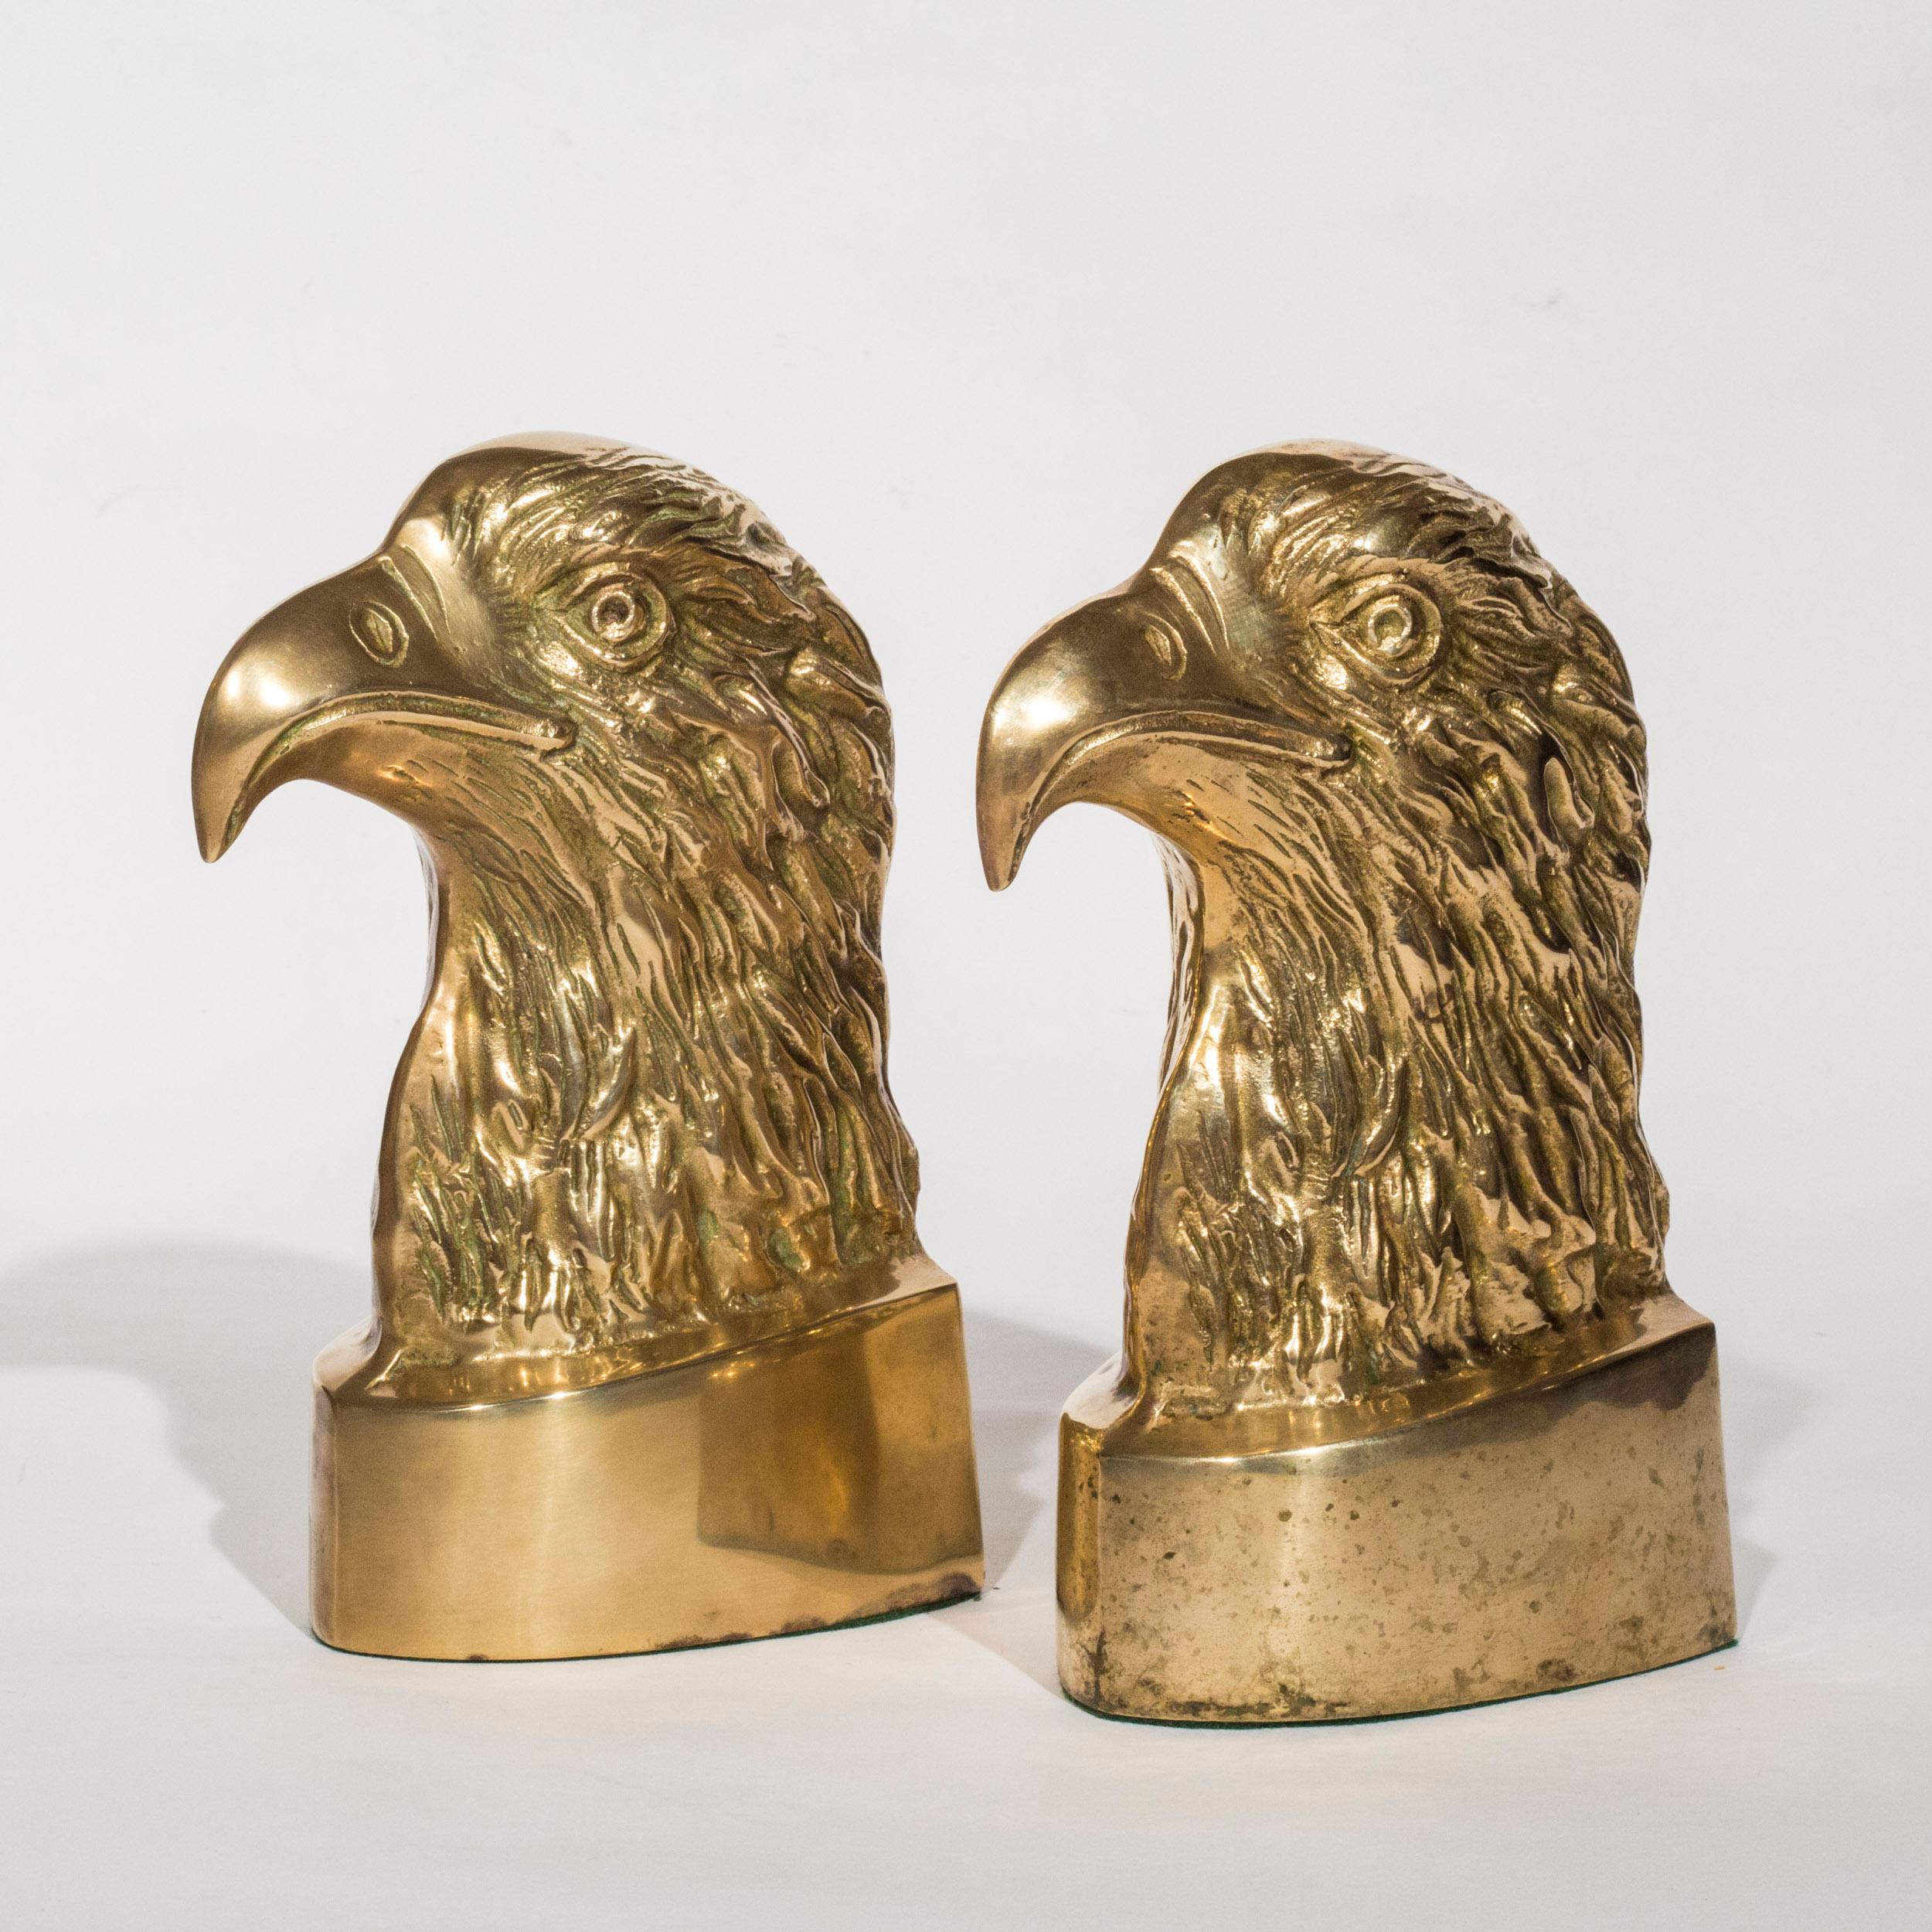 A charming pair 'American Eagle' brass bookends or doorstops,

20th century.
   